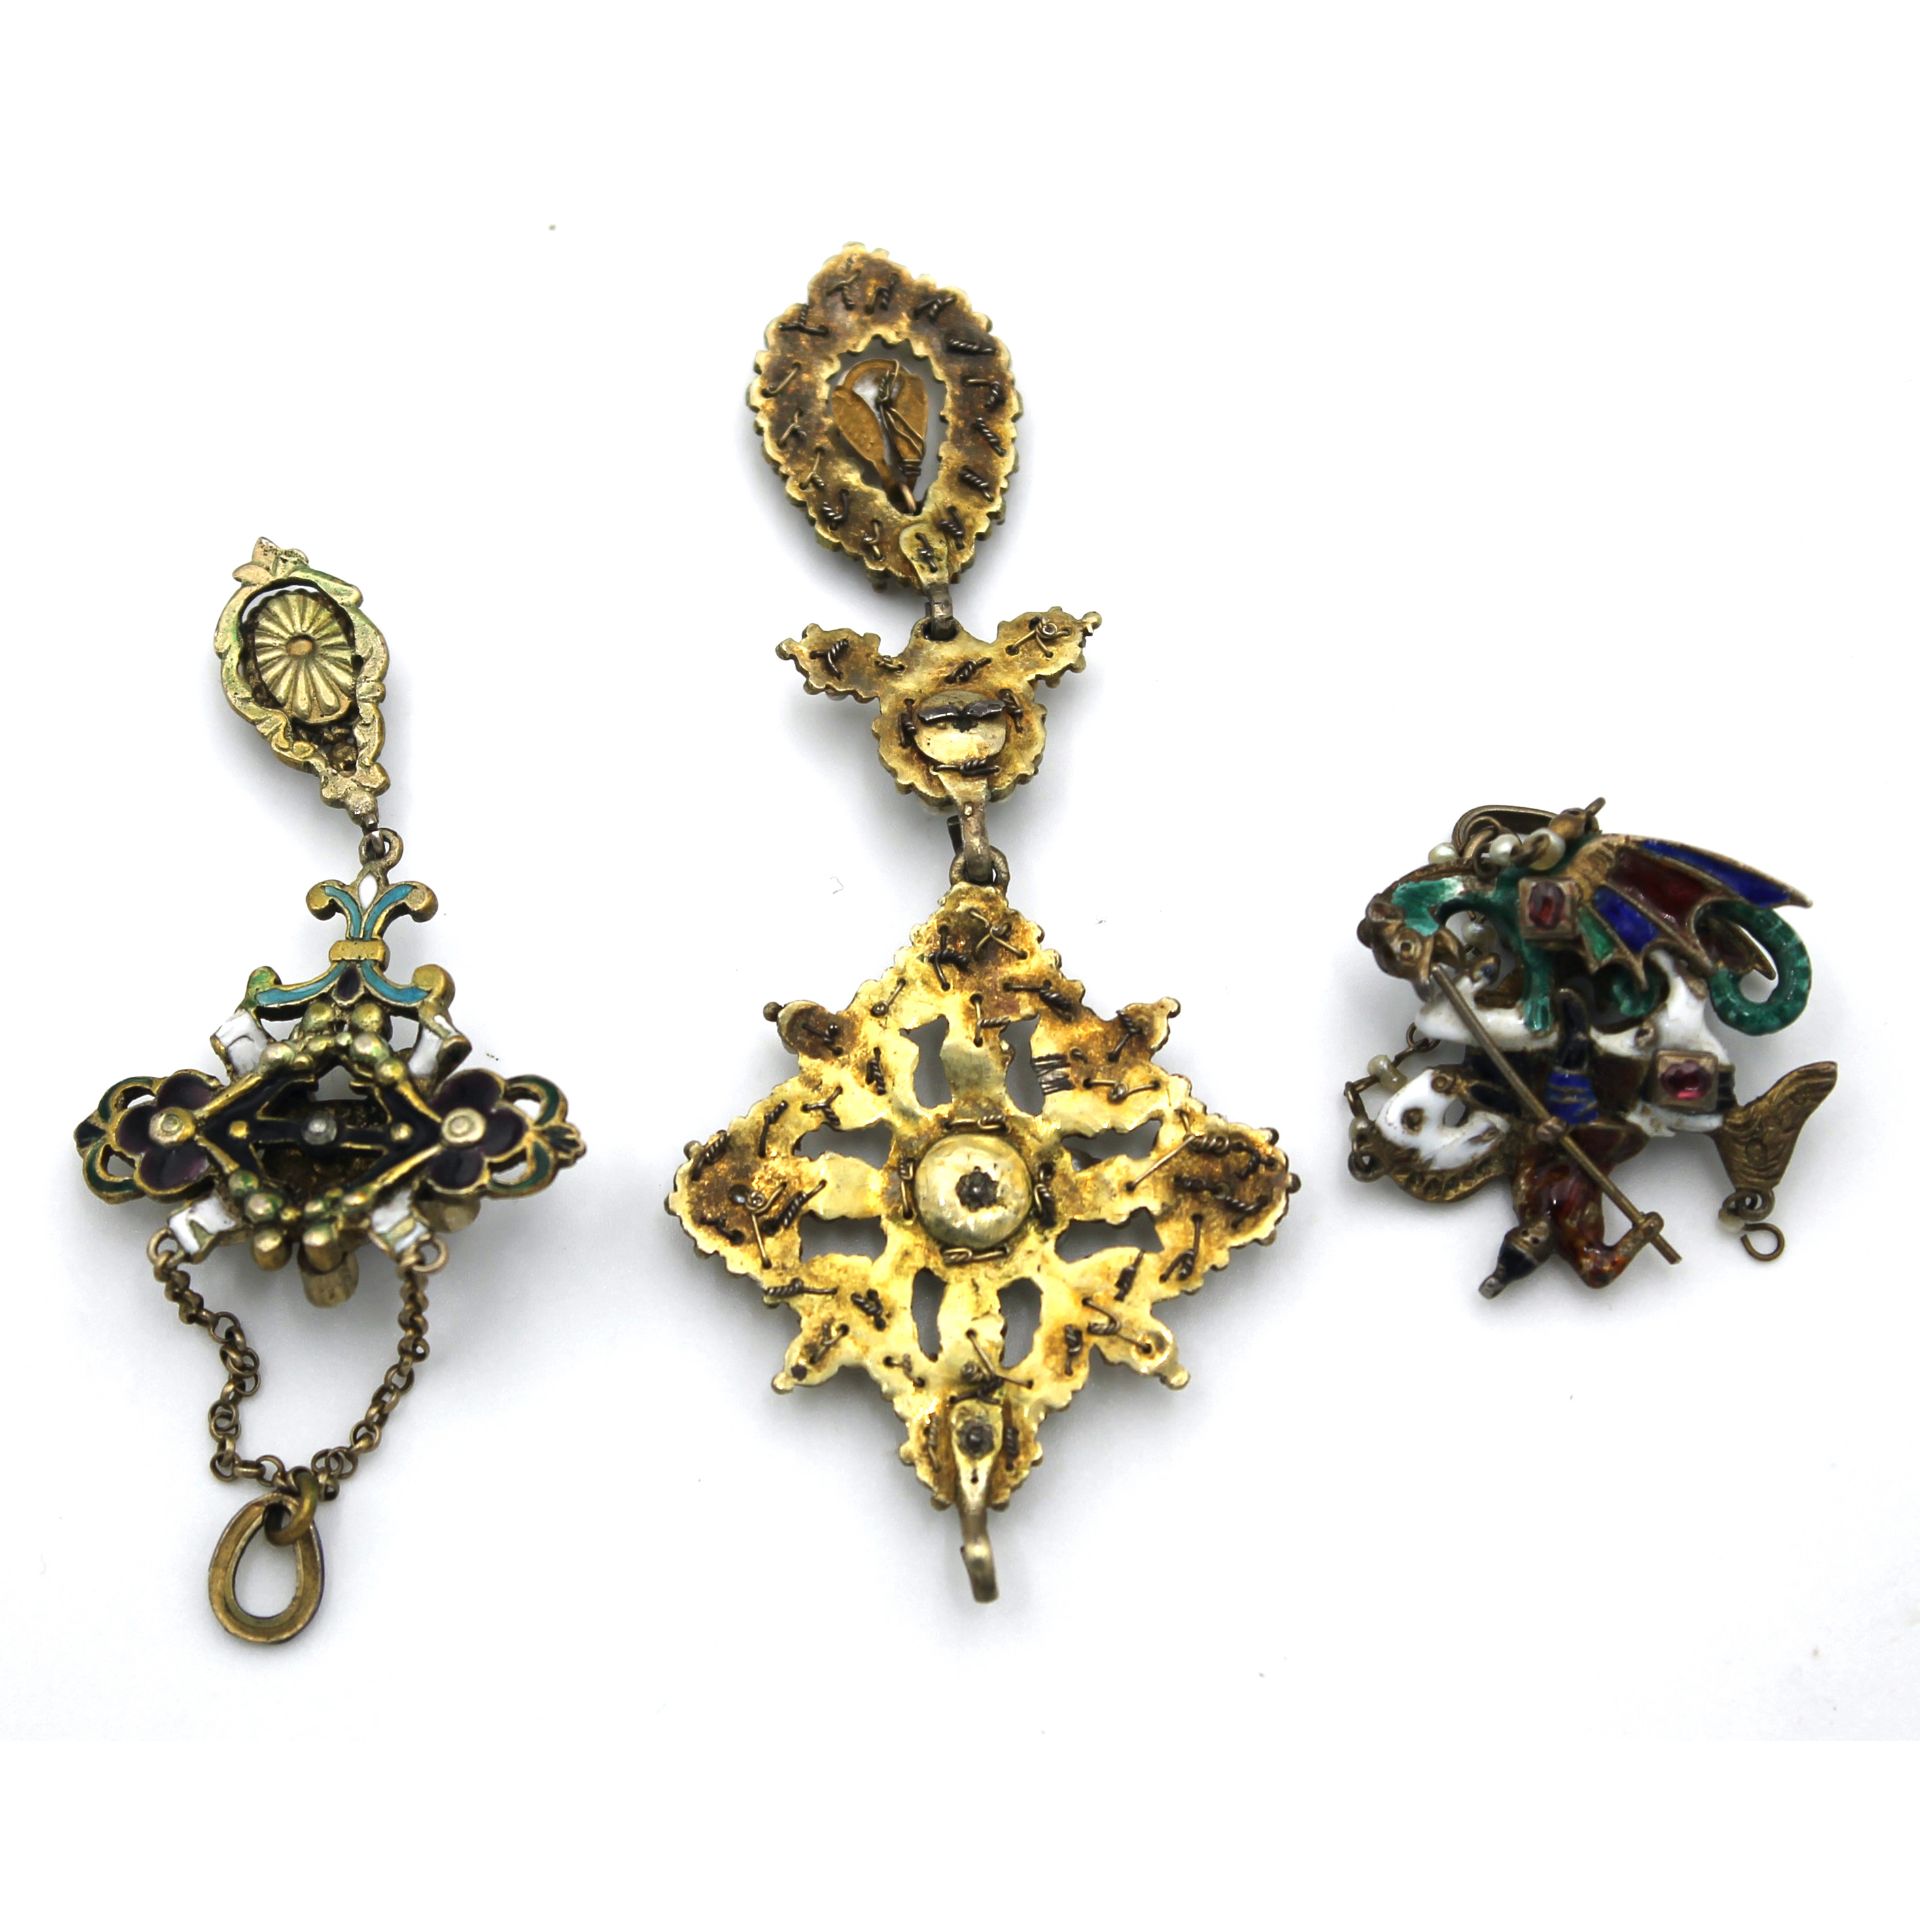 Tre spille con smalti - Three brooches with enamels - Image 2 of 2